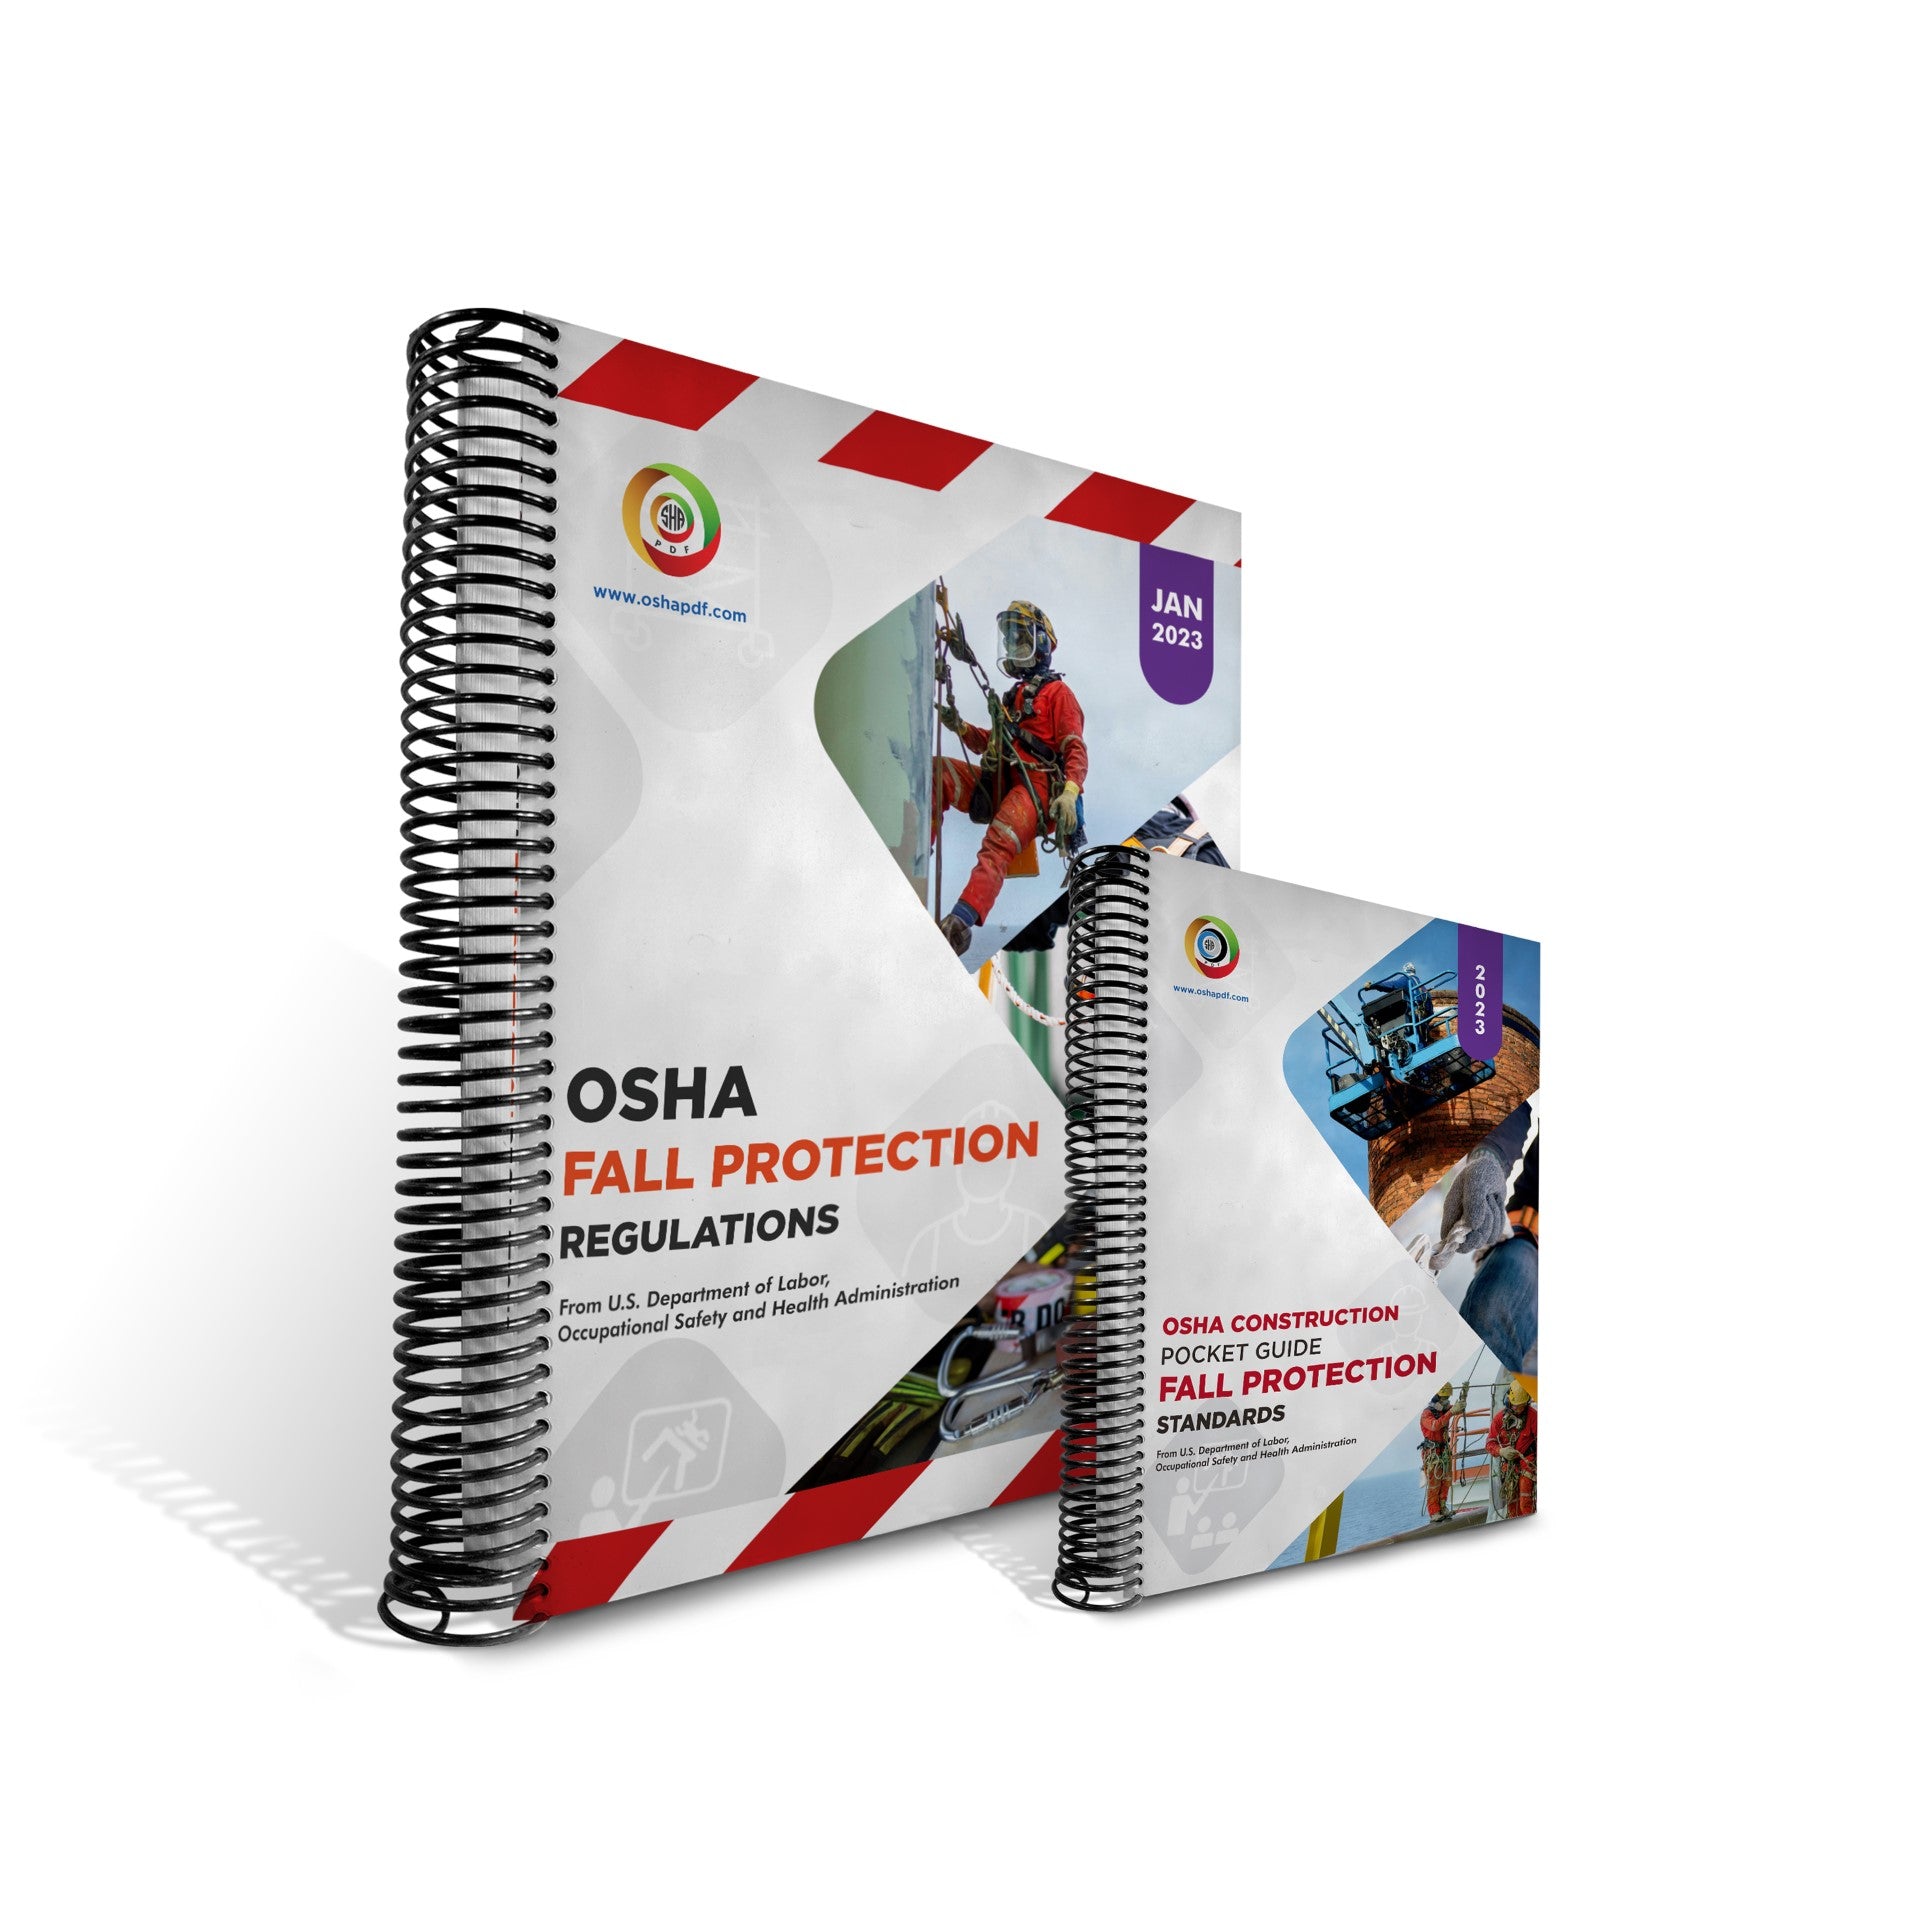 Fall Protection Regulations 2023 Book and Pocket Guide Combo